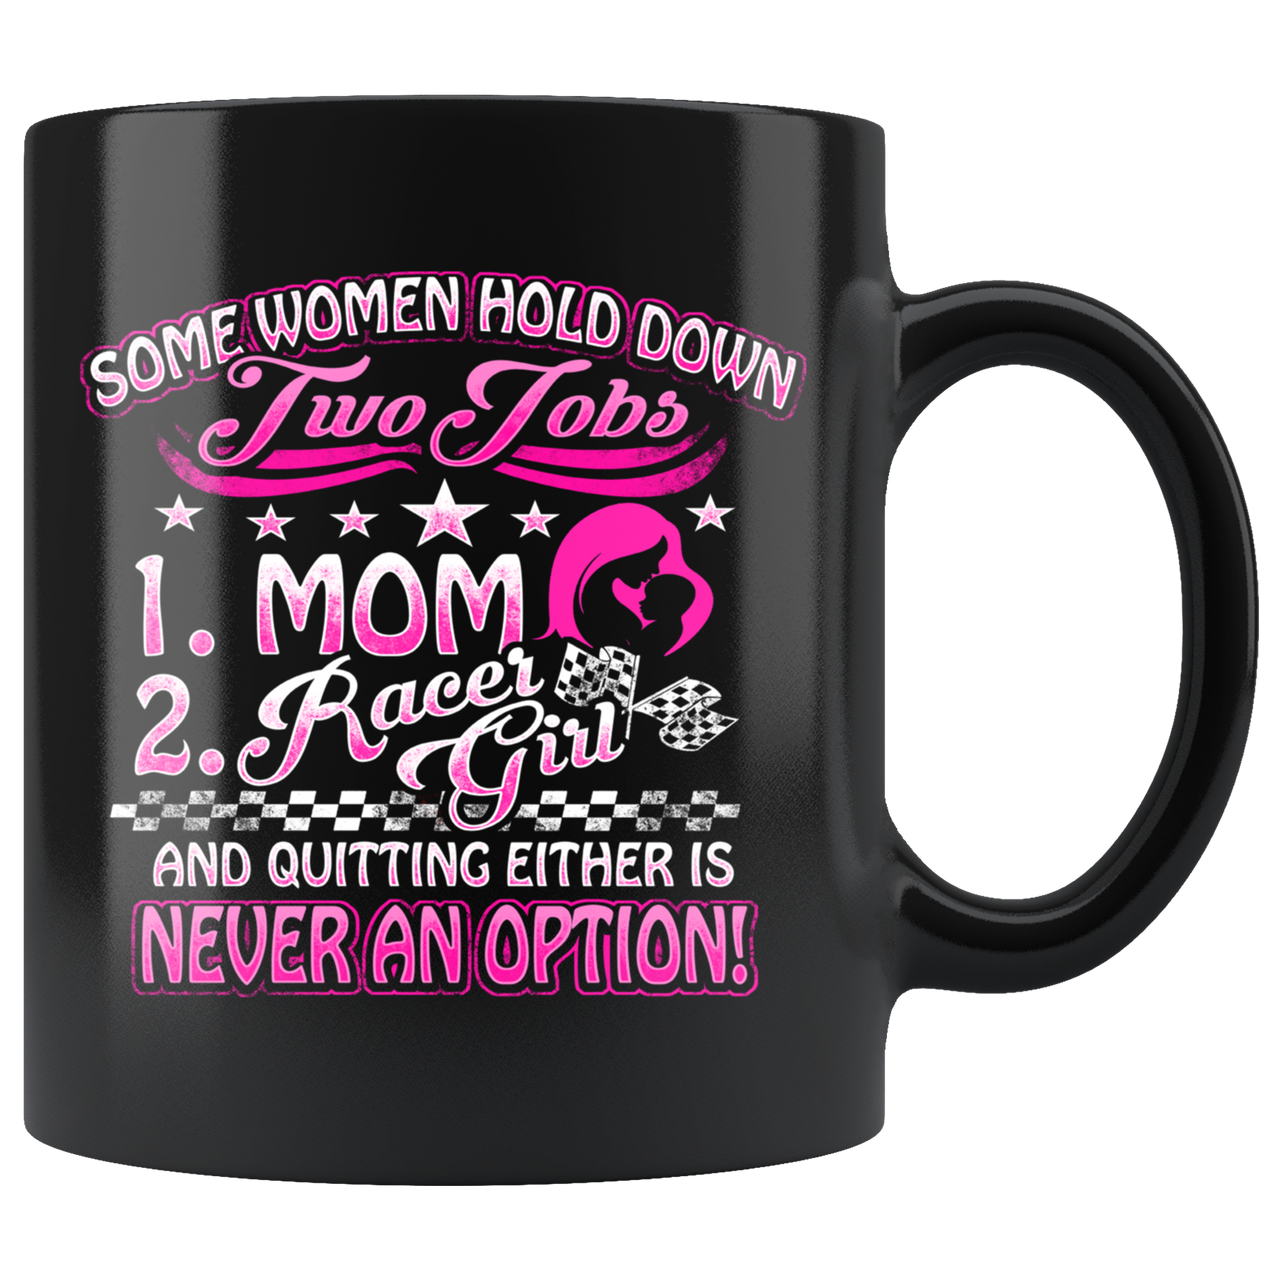 Some Women Hold Down Two Jobs Mom And Racer Mug!